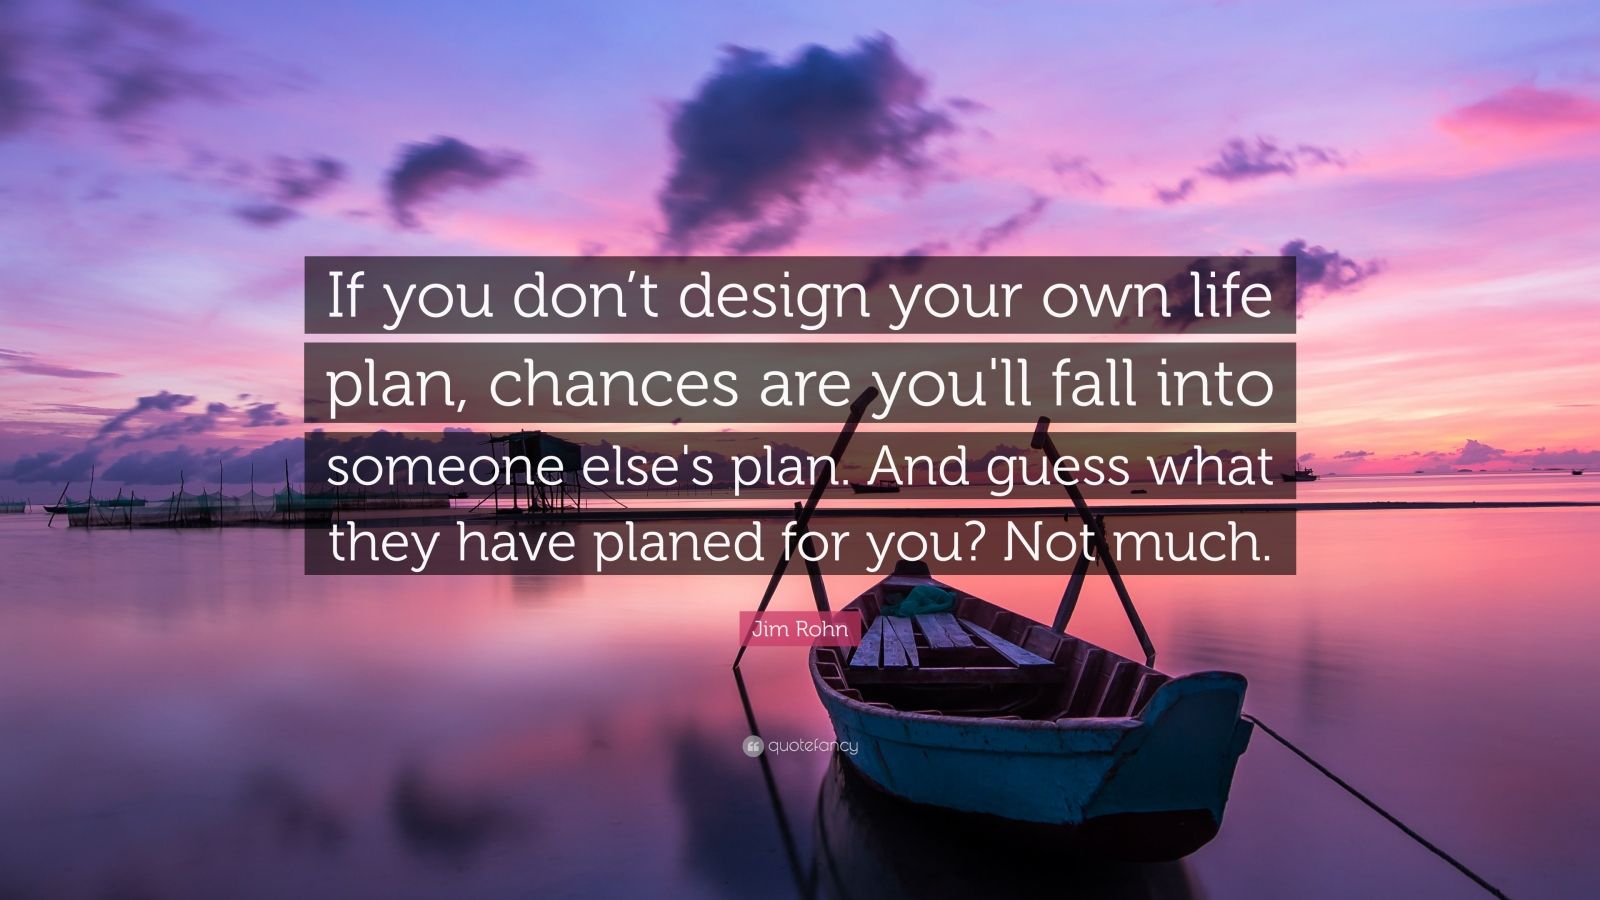 Jim Rohn Quote “If you don’t design your own life plan